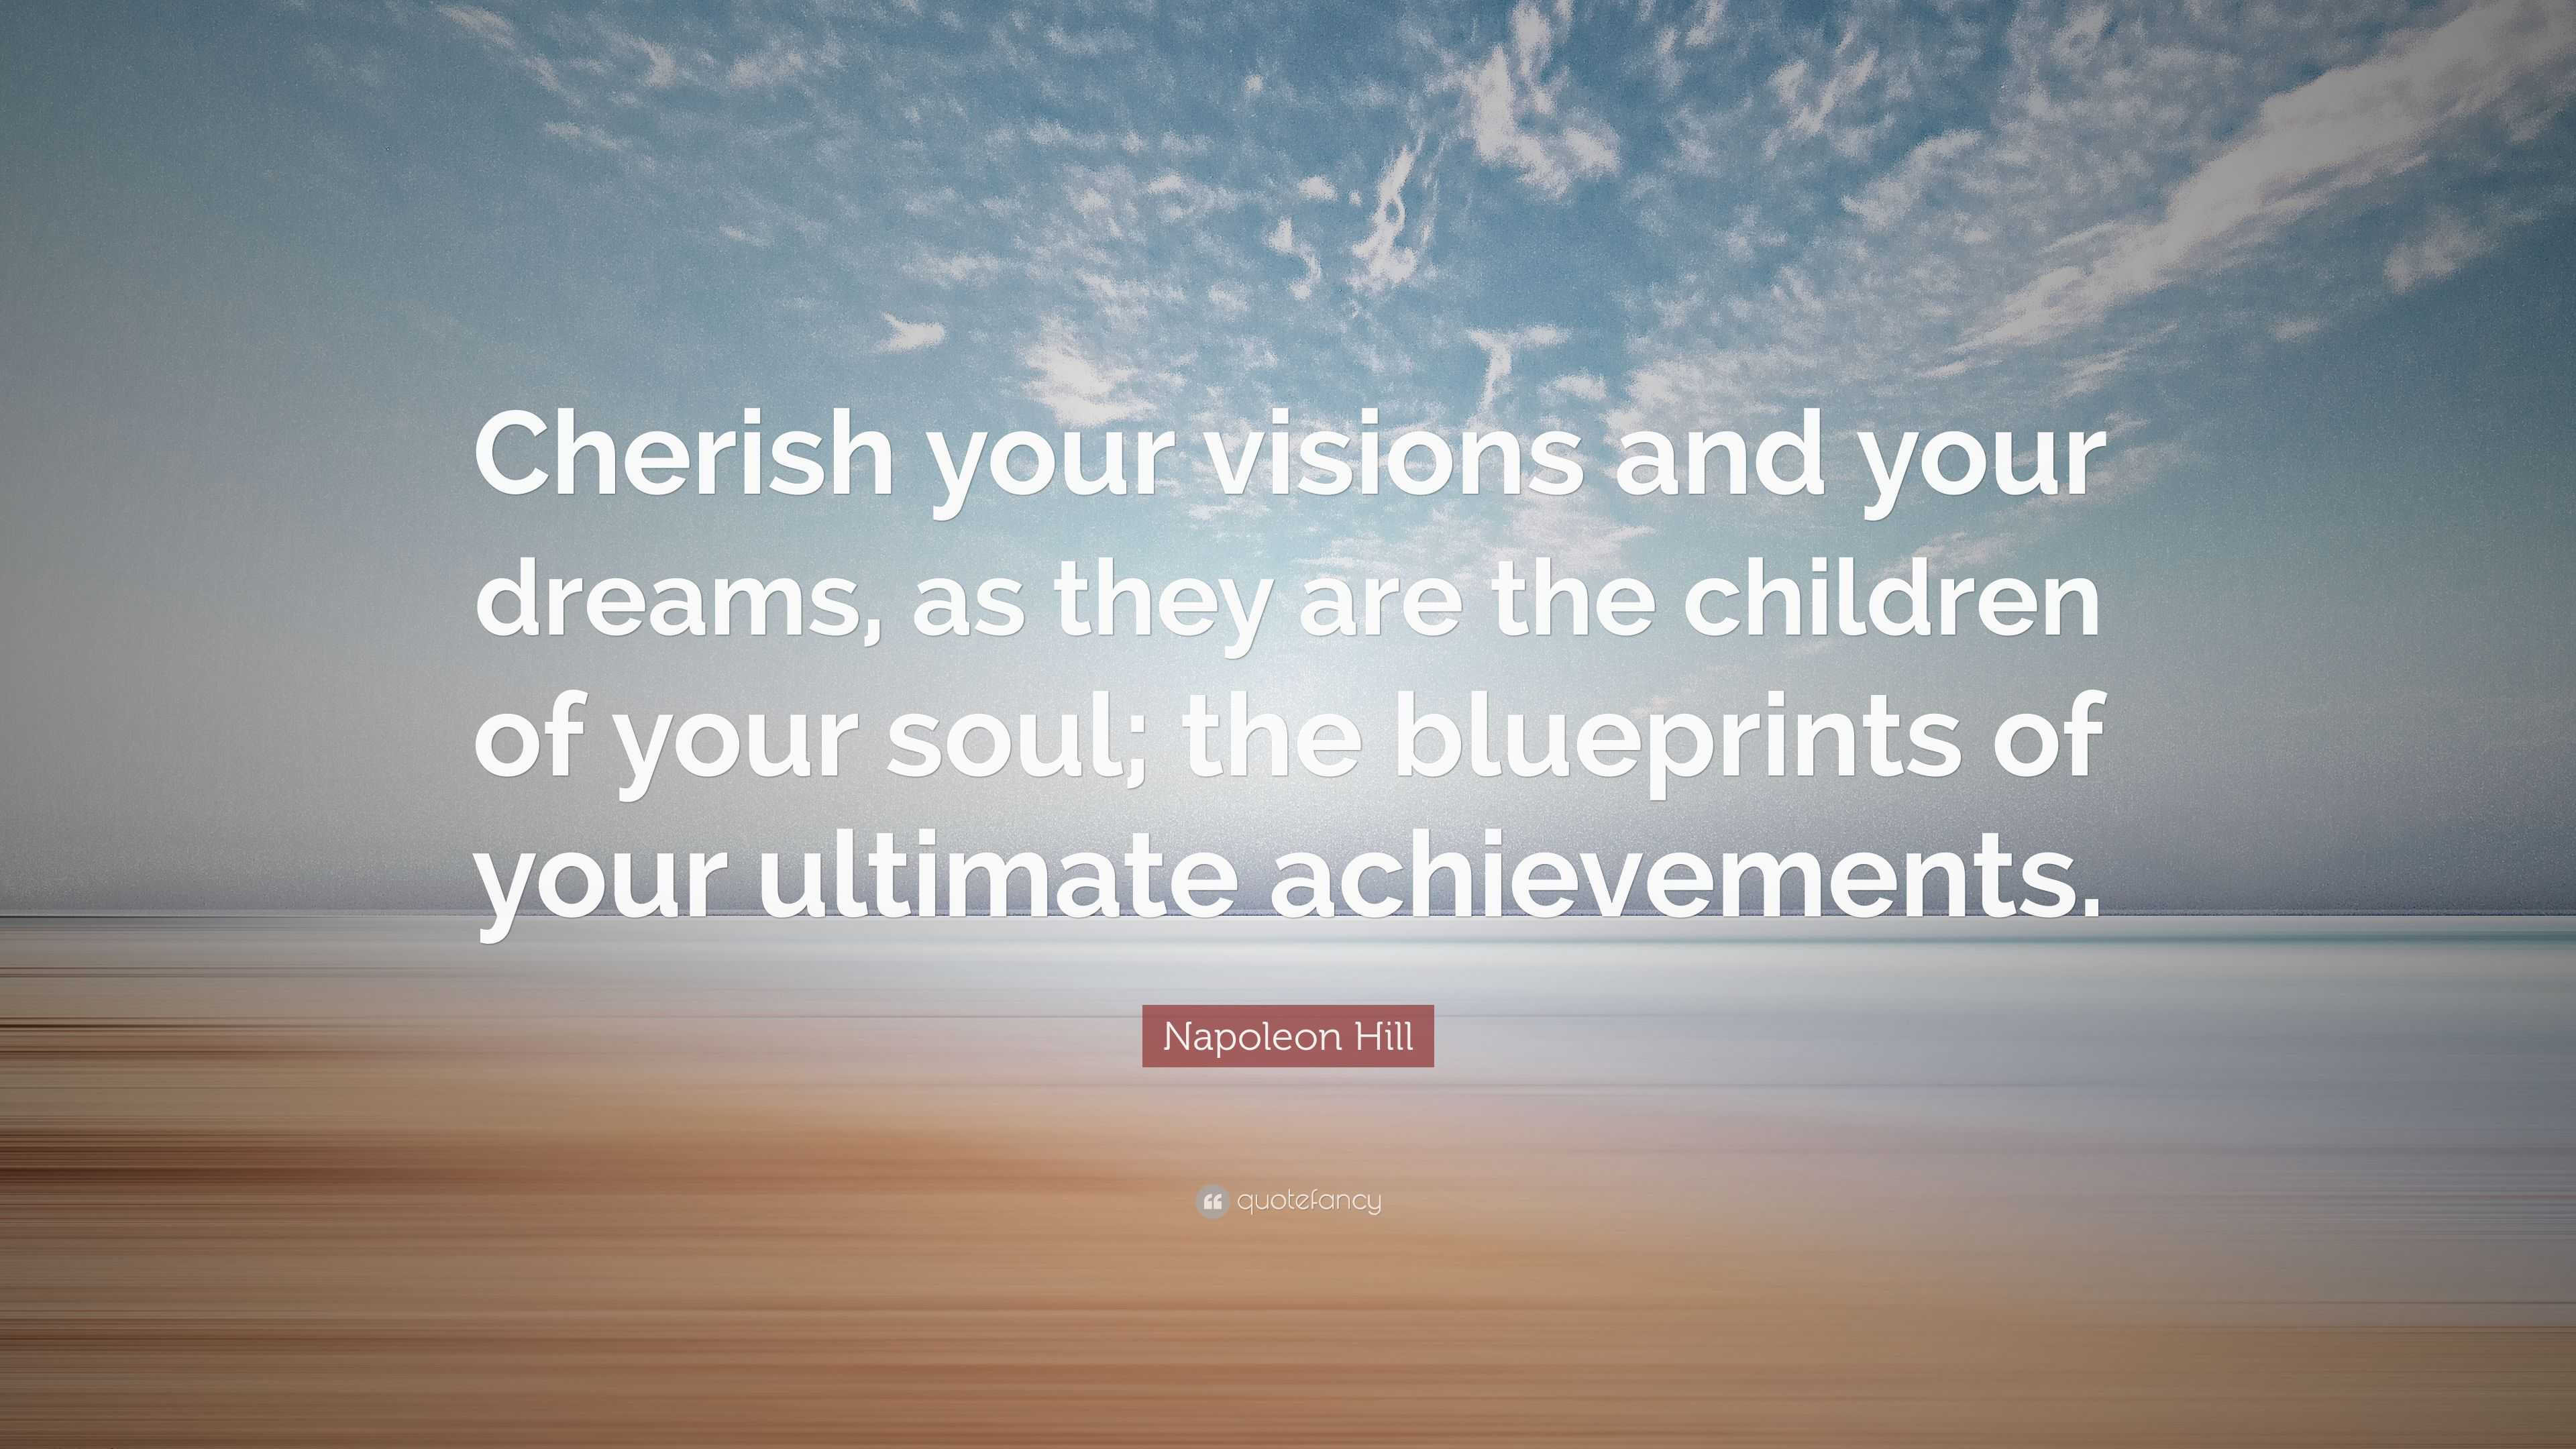 Napoleon Hill - Cherish your visions and your dreams as